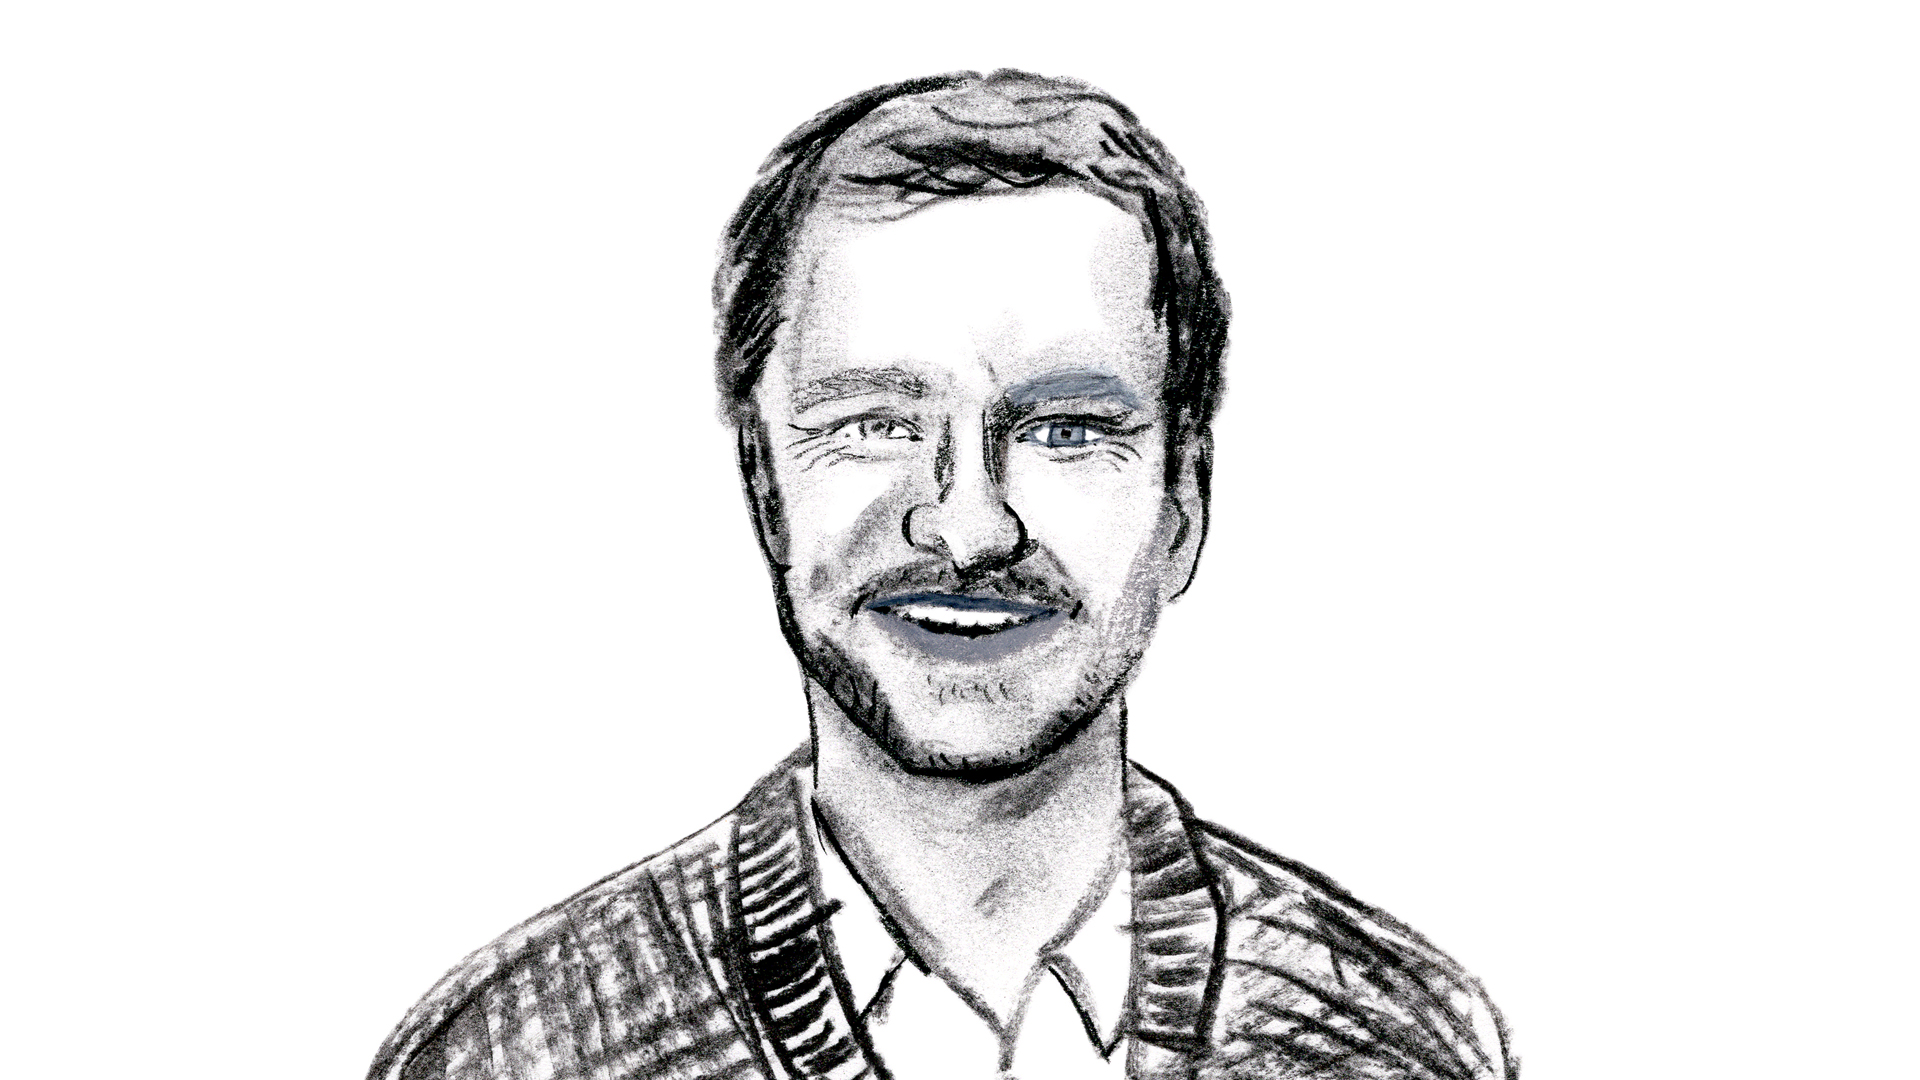 An illustrated portrait of Max Roser in black and white.